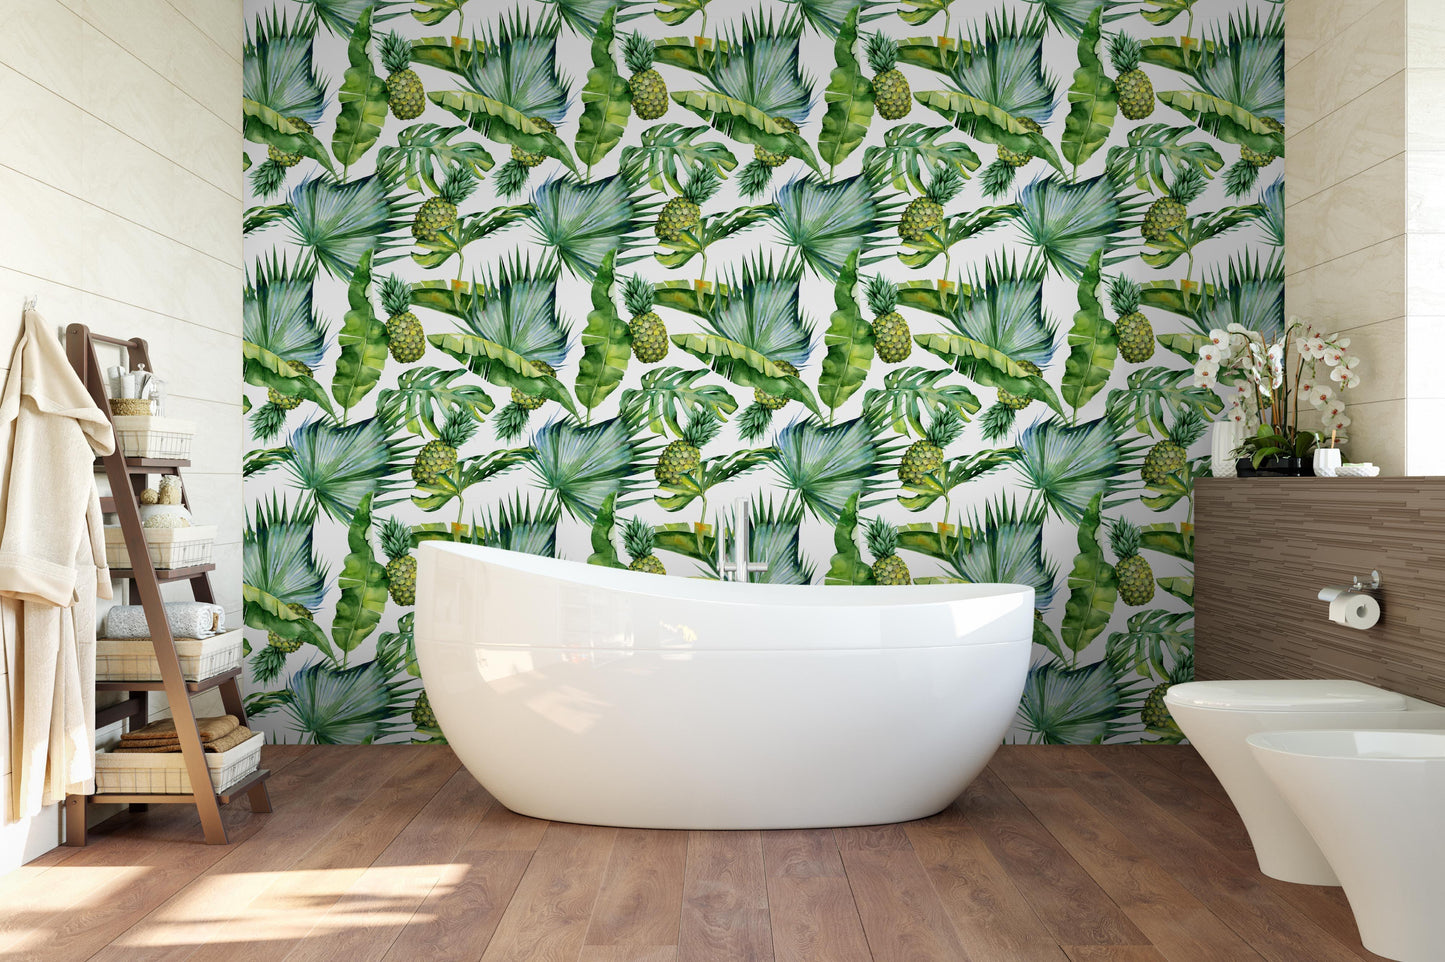 Tropical Palm Leaves and Pineapples Removable Wallpaper Tropical Palm Leaves and Pineapples Removable Wallpaper 